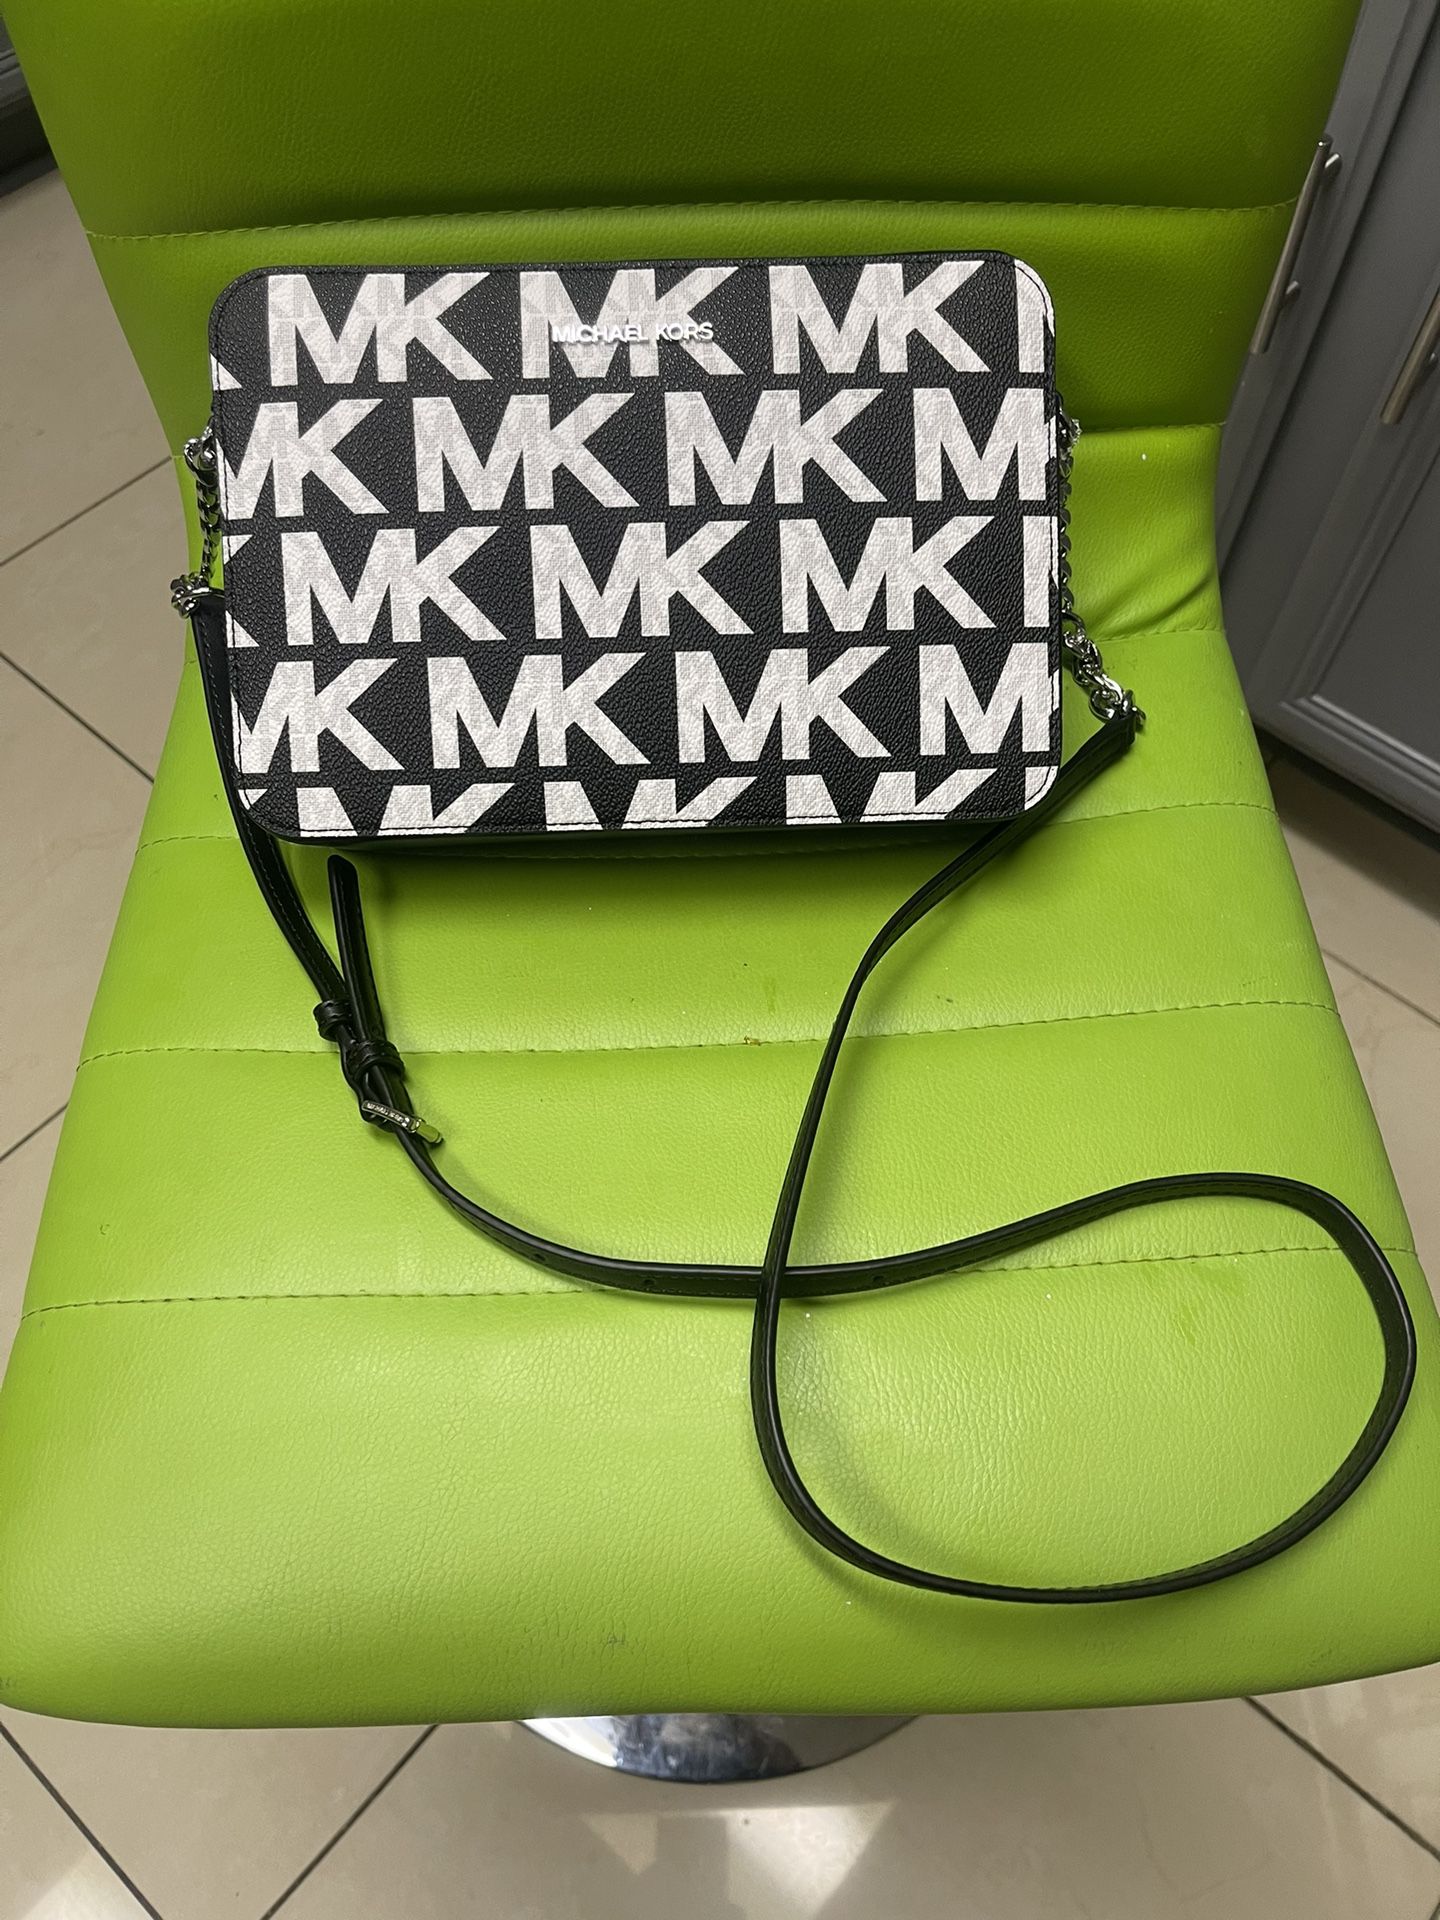 New Mk Crossbody Bag Perfect Gift 🎁 For Mother Day 